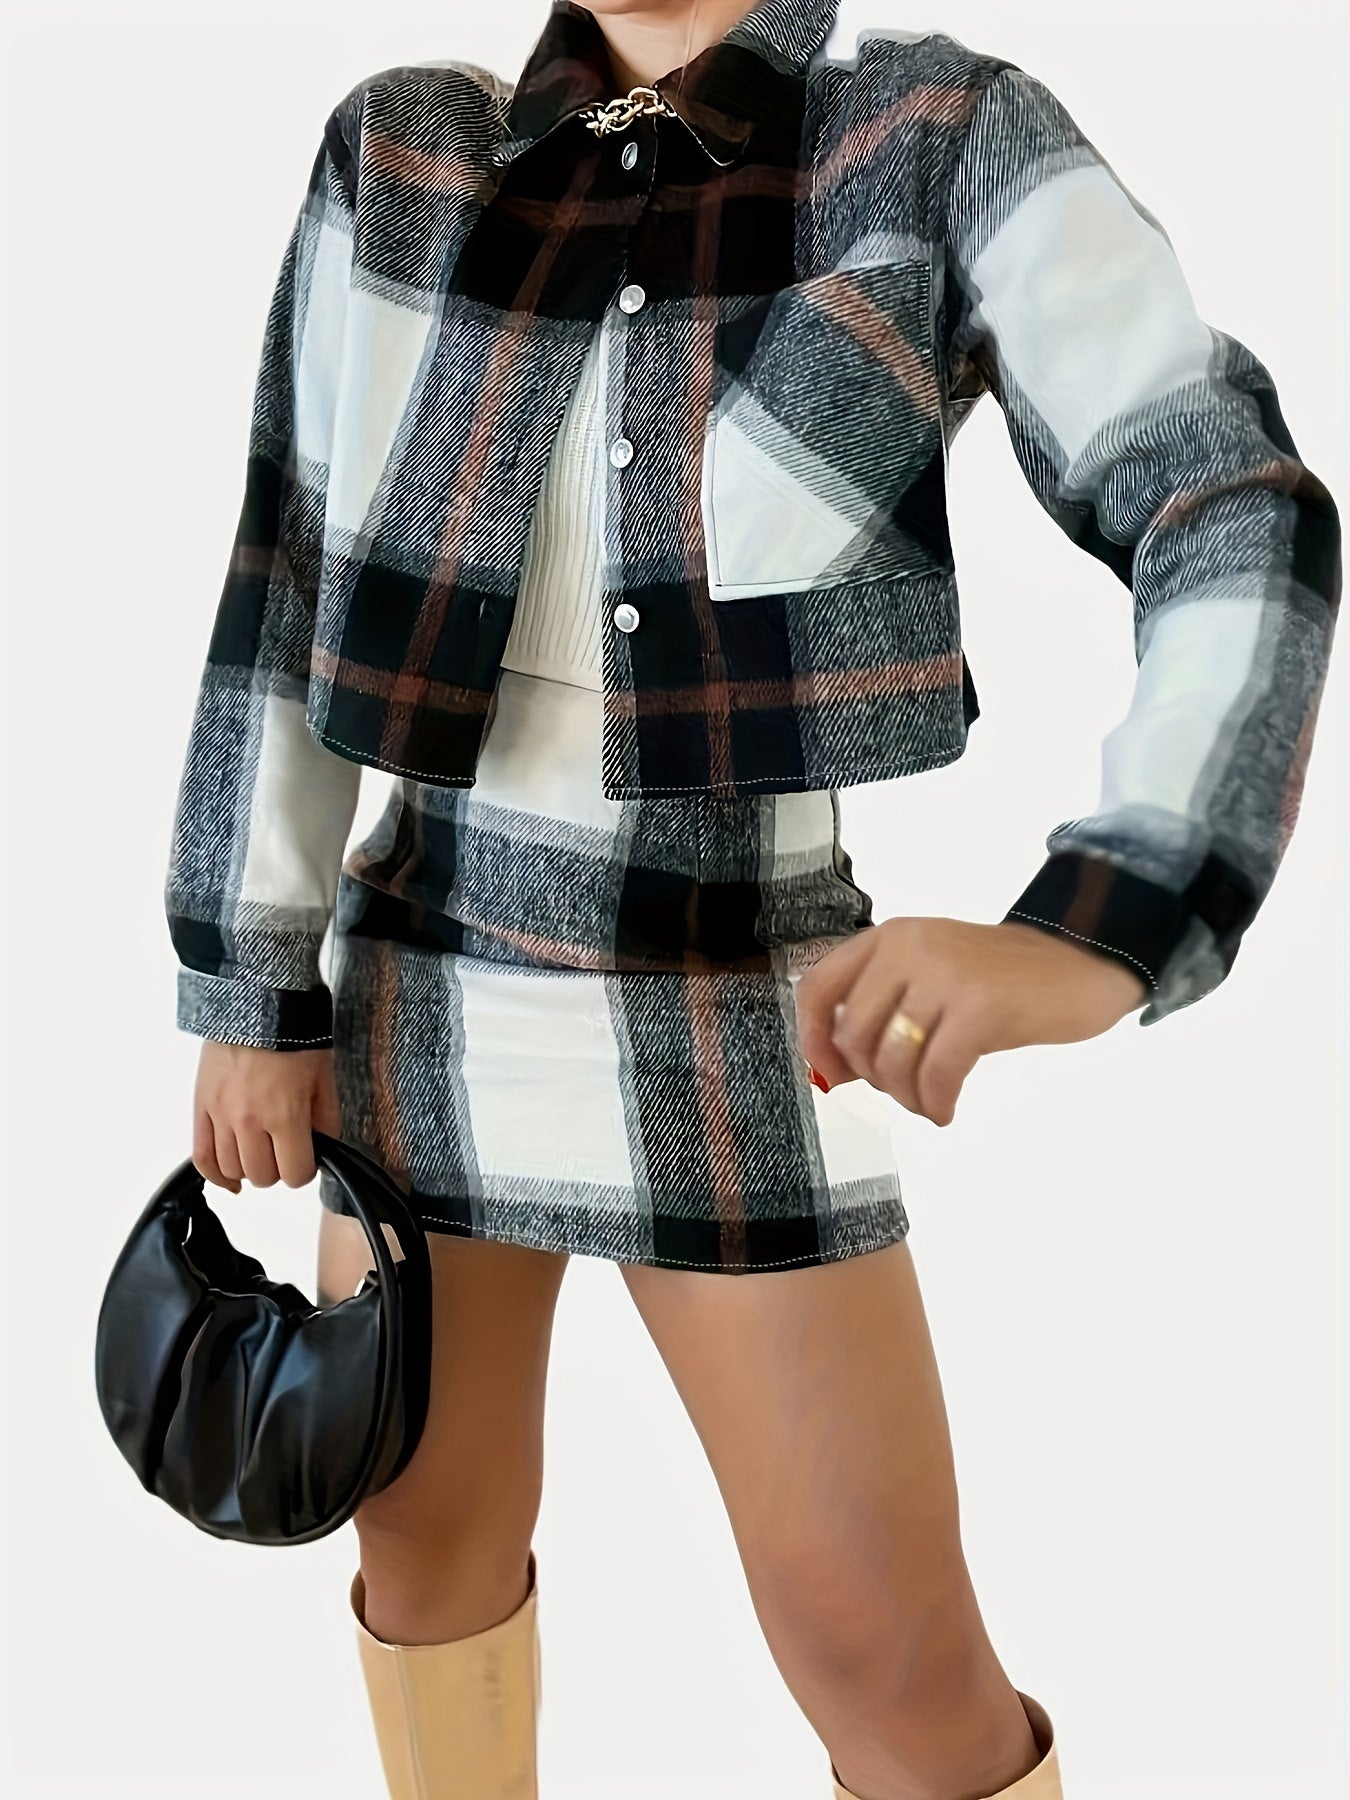 Antmvs Plaid Print Casual Two-piece Set, Button Front Long Sleeve Tops & High Waist Skirts Outfits, Women's Clothing